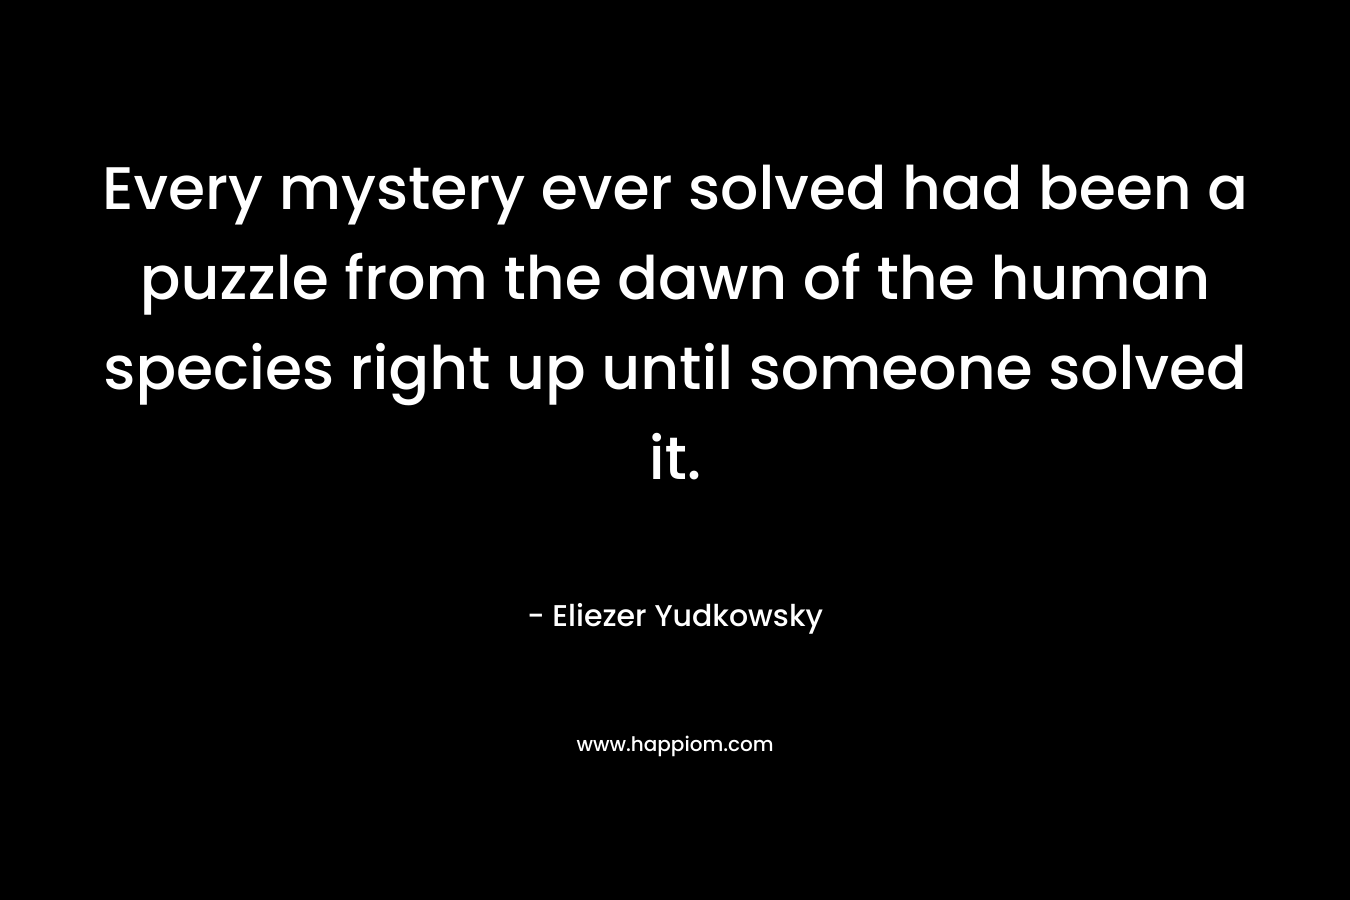 Every mystery ever solved had been a puzzle from the dawn of the human species right up until someone solved it. – Eliezer Yudkowsky